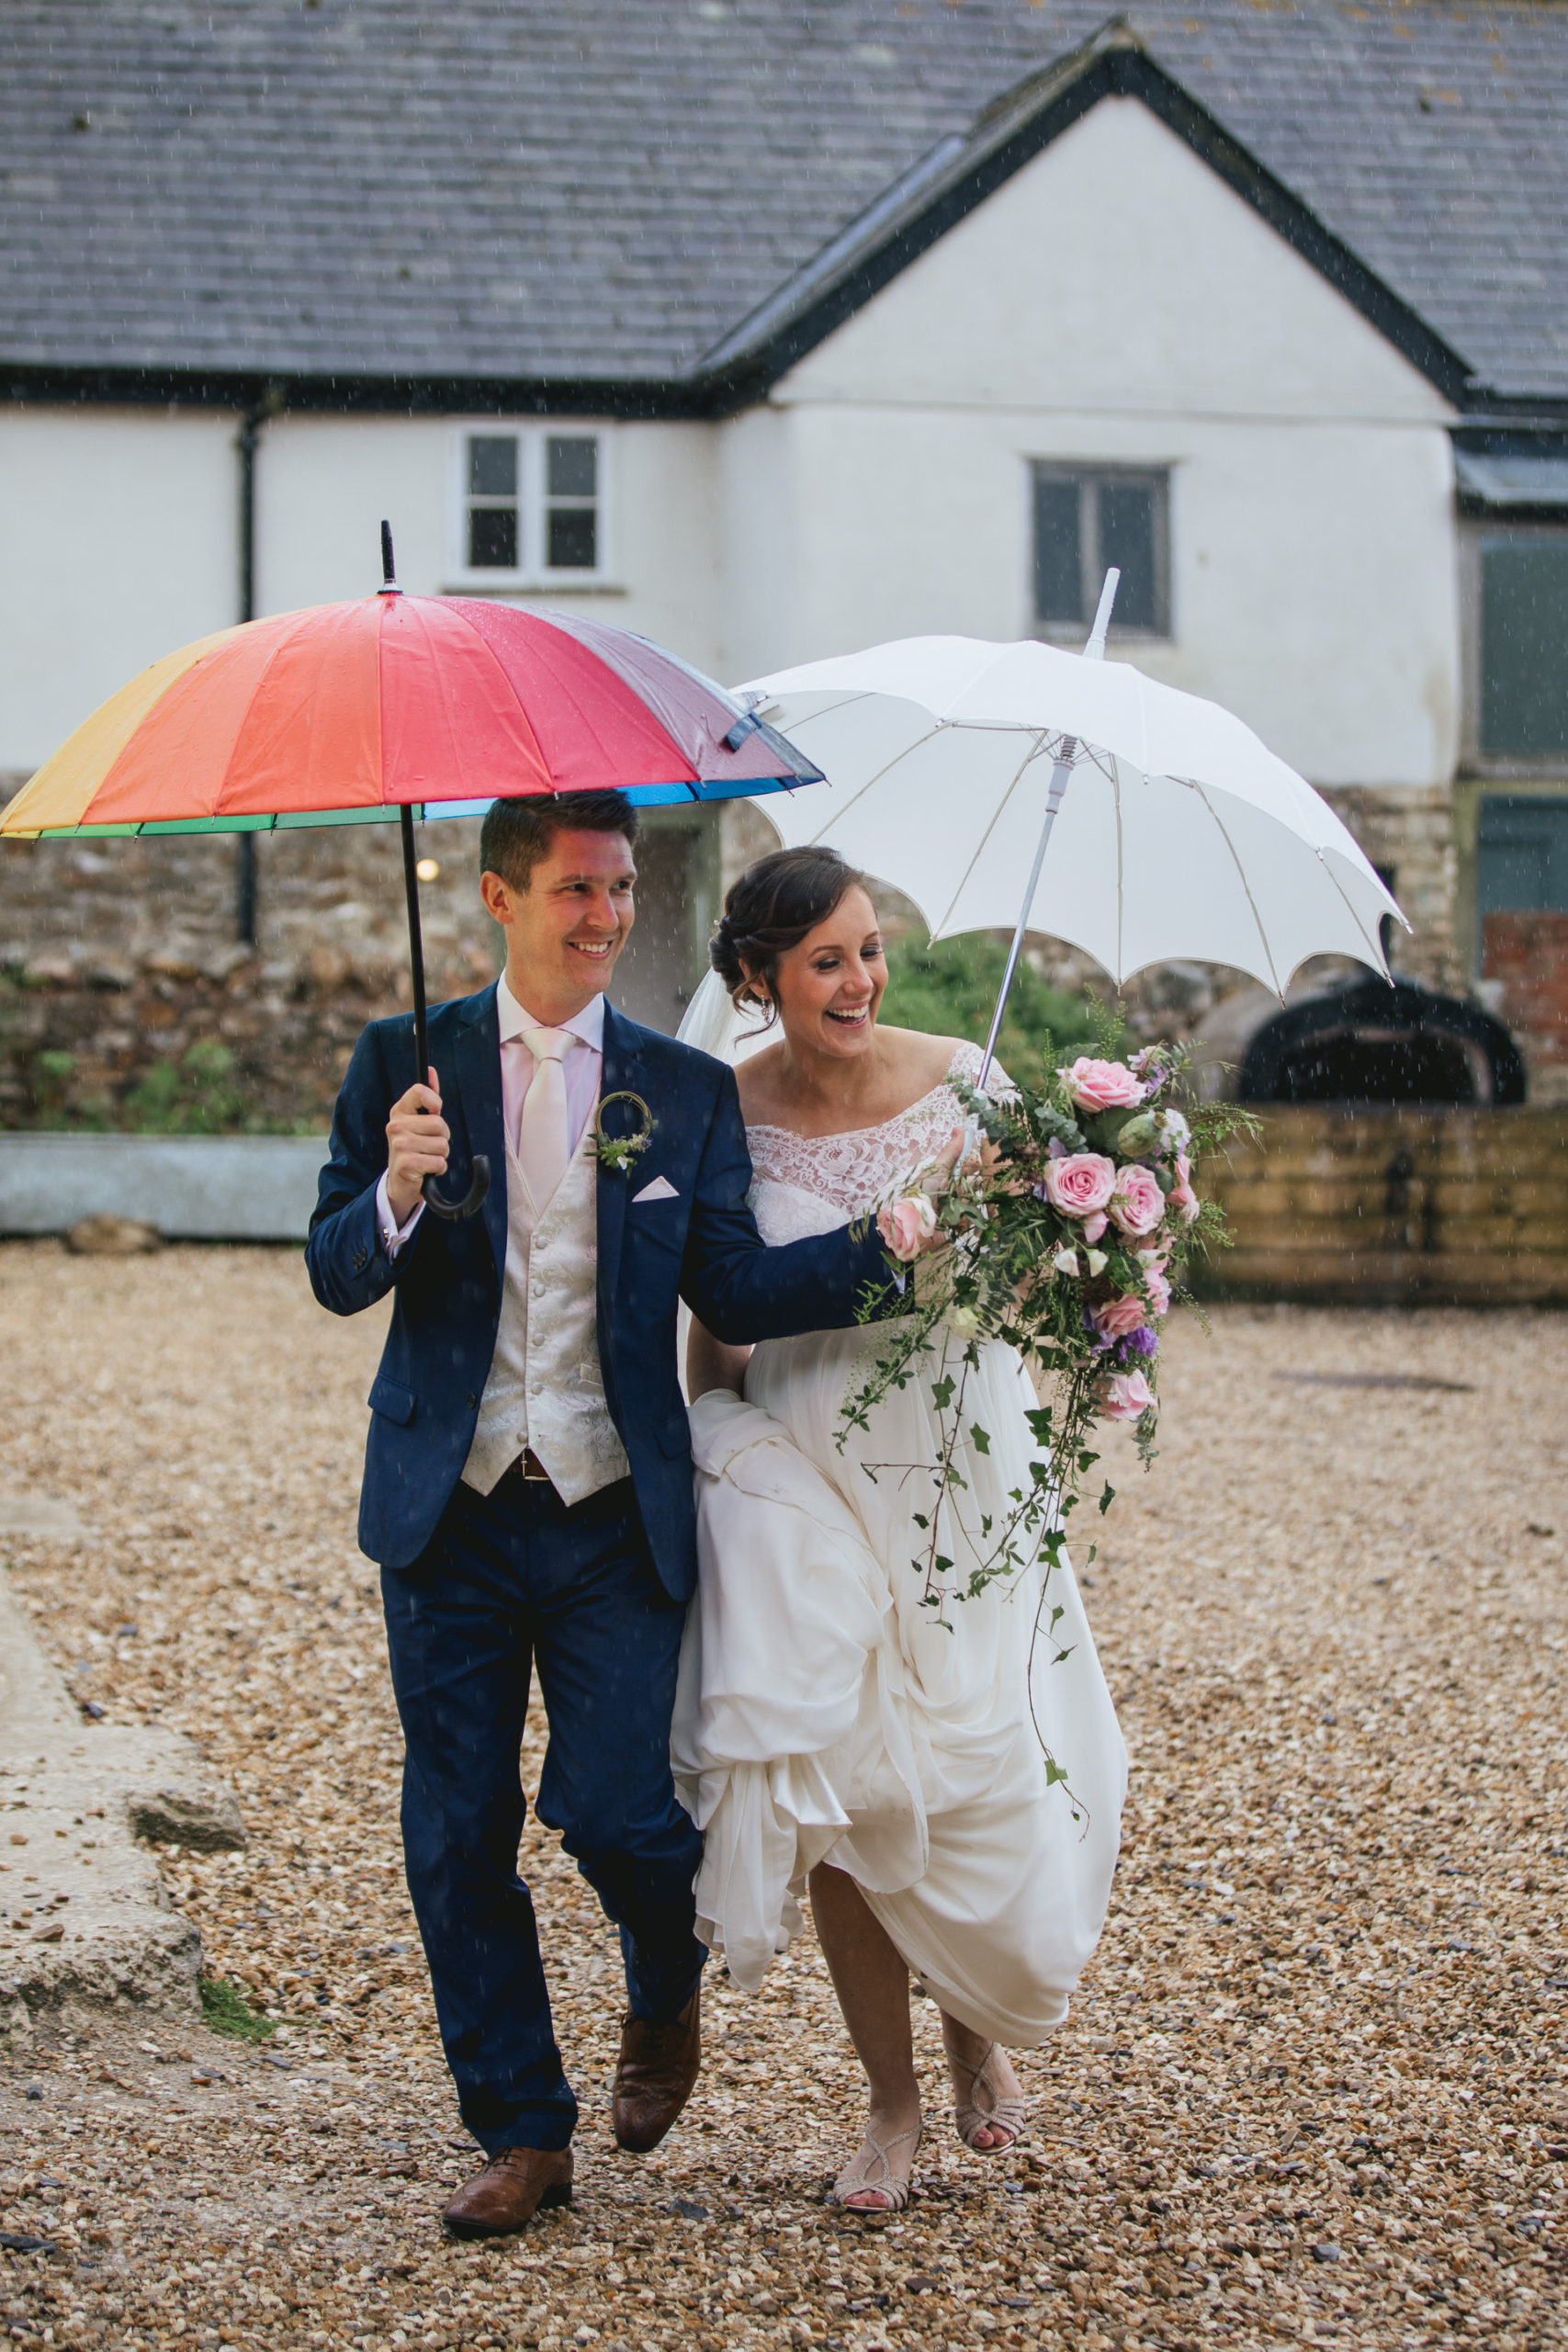 Bride and groom smiling under an umbrella on a rainy wedding day 